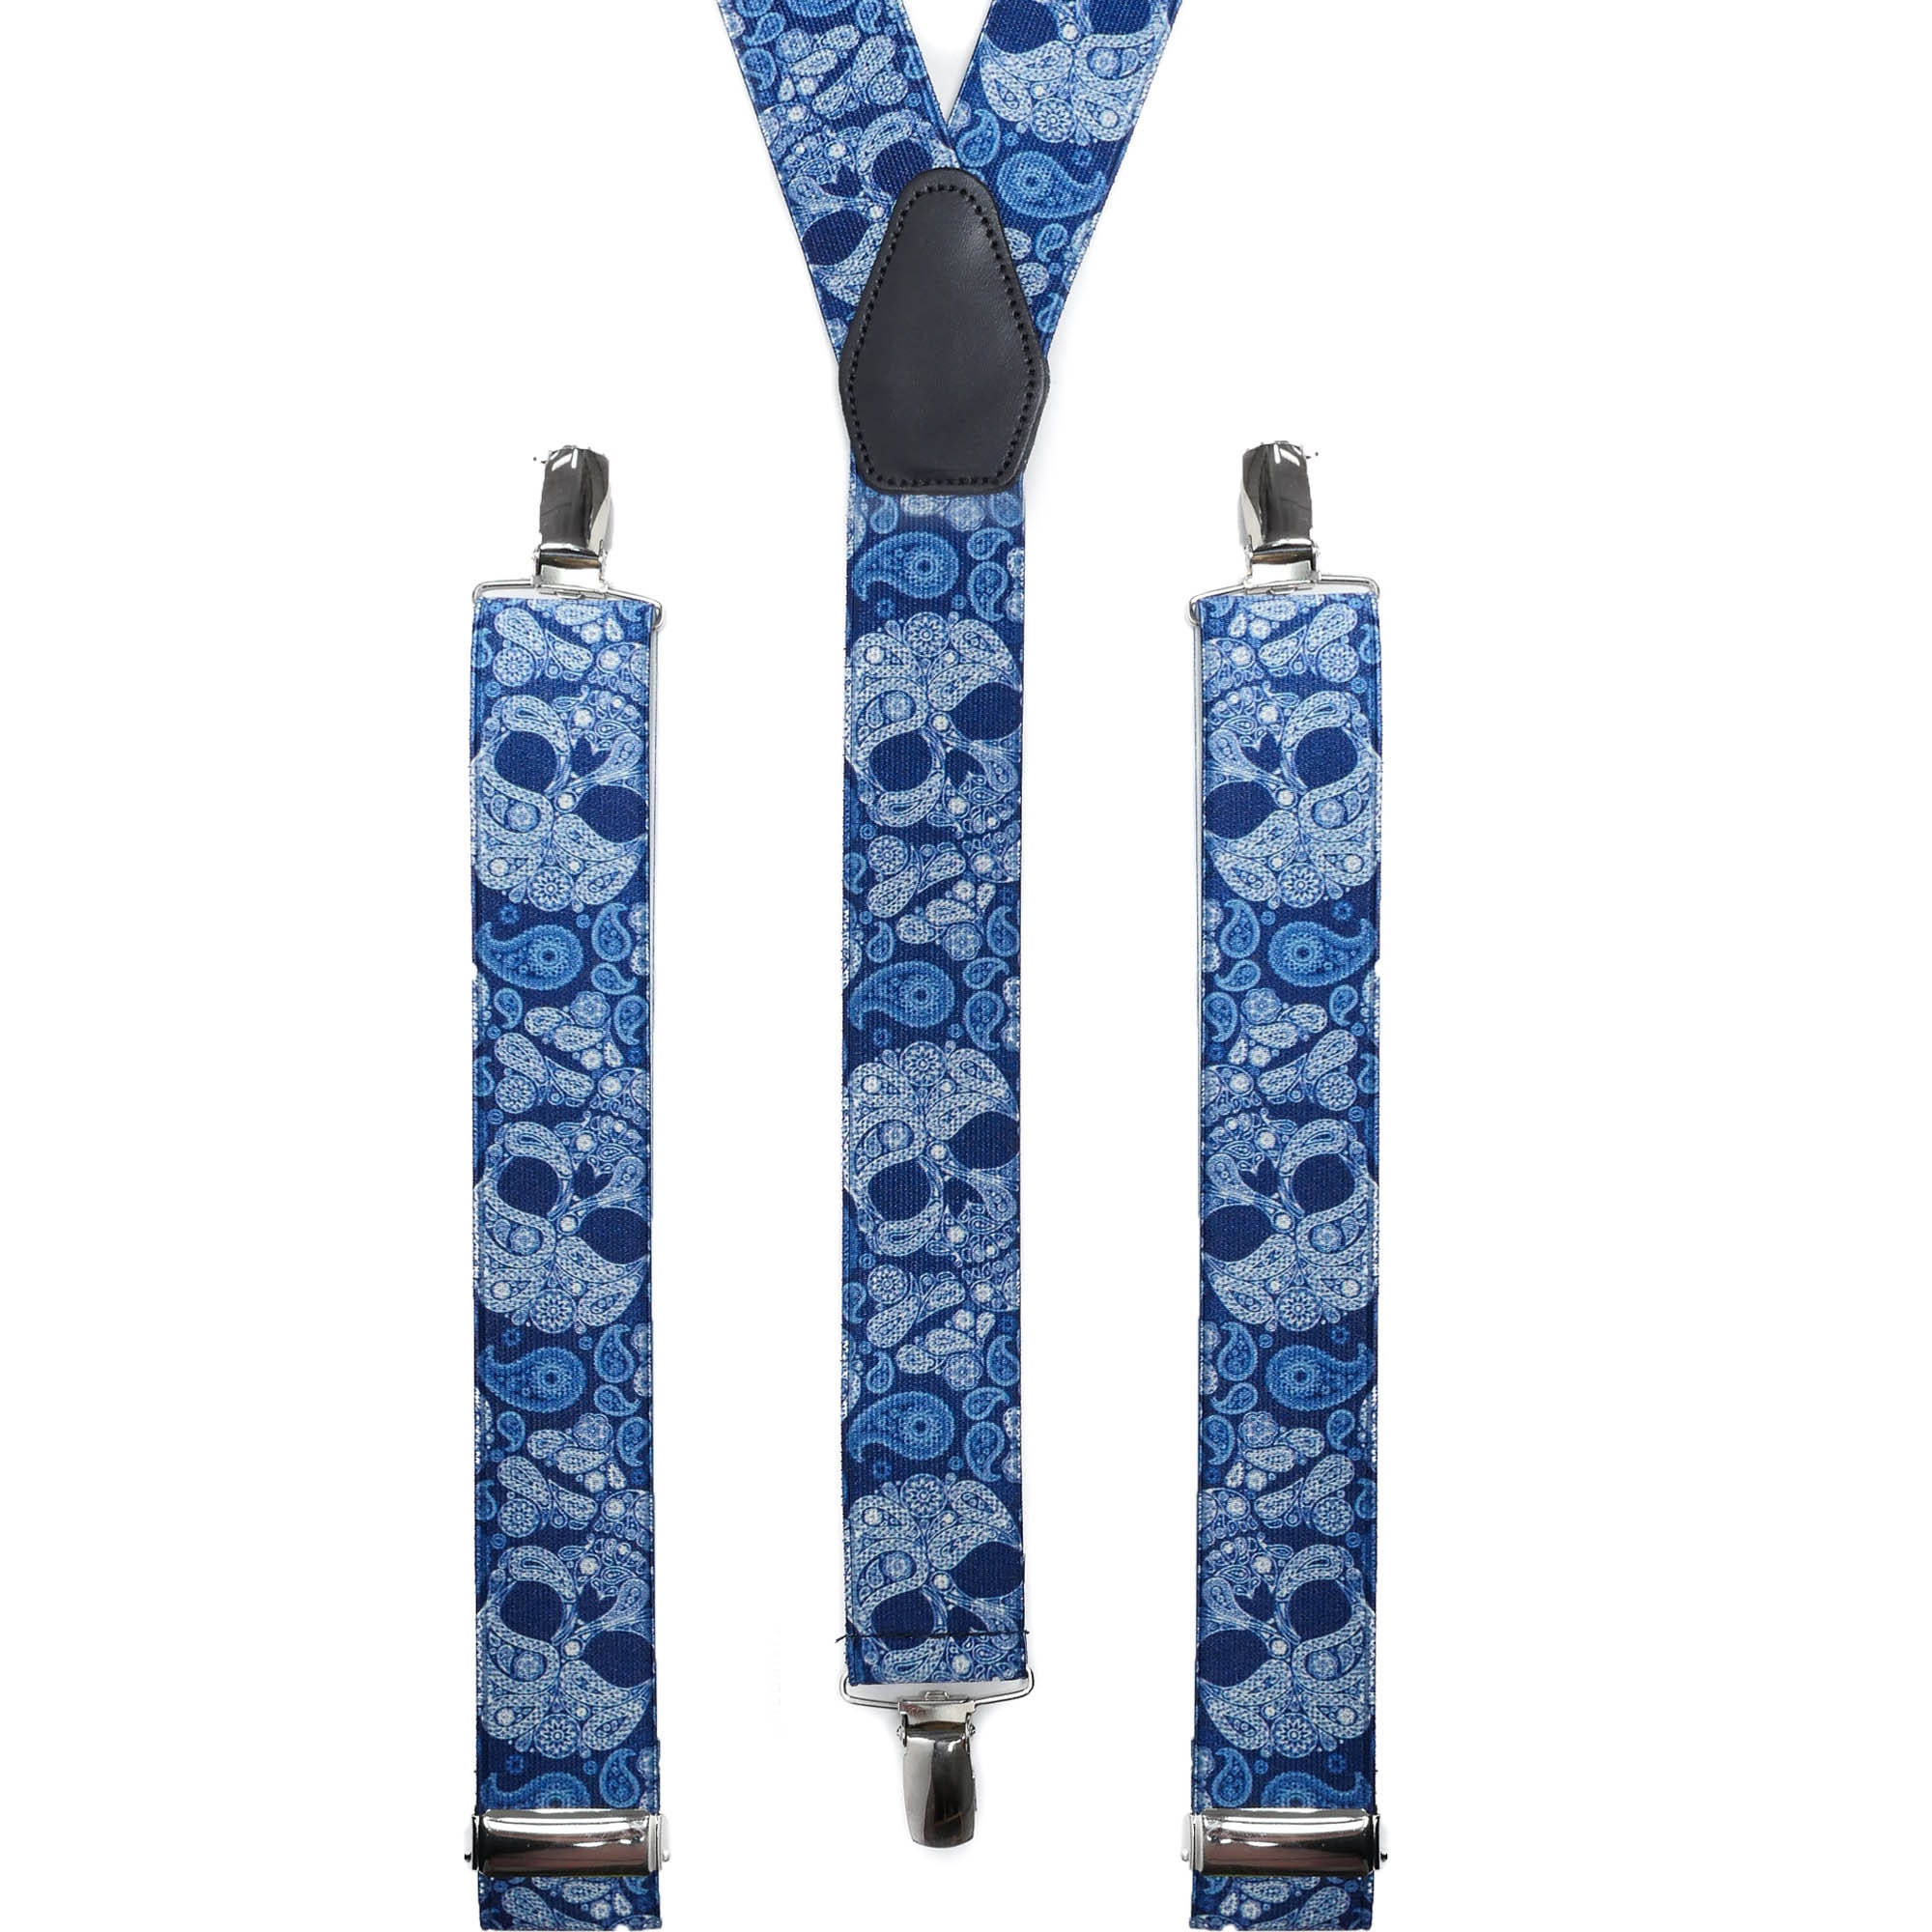 Leather End Suspenders for Men Blue and Grey Striped Y Ba  httpswwwamazoncoukdpB07W6J86BRrefcmswrp  Trouser braces Mens  trouser braces Suspenders